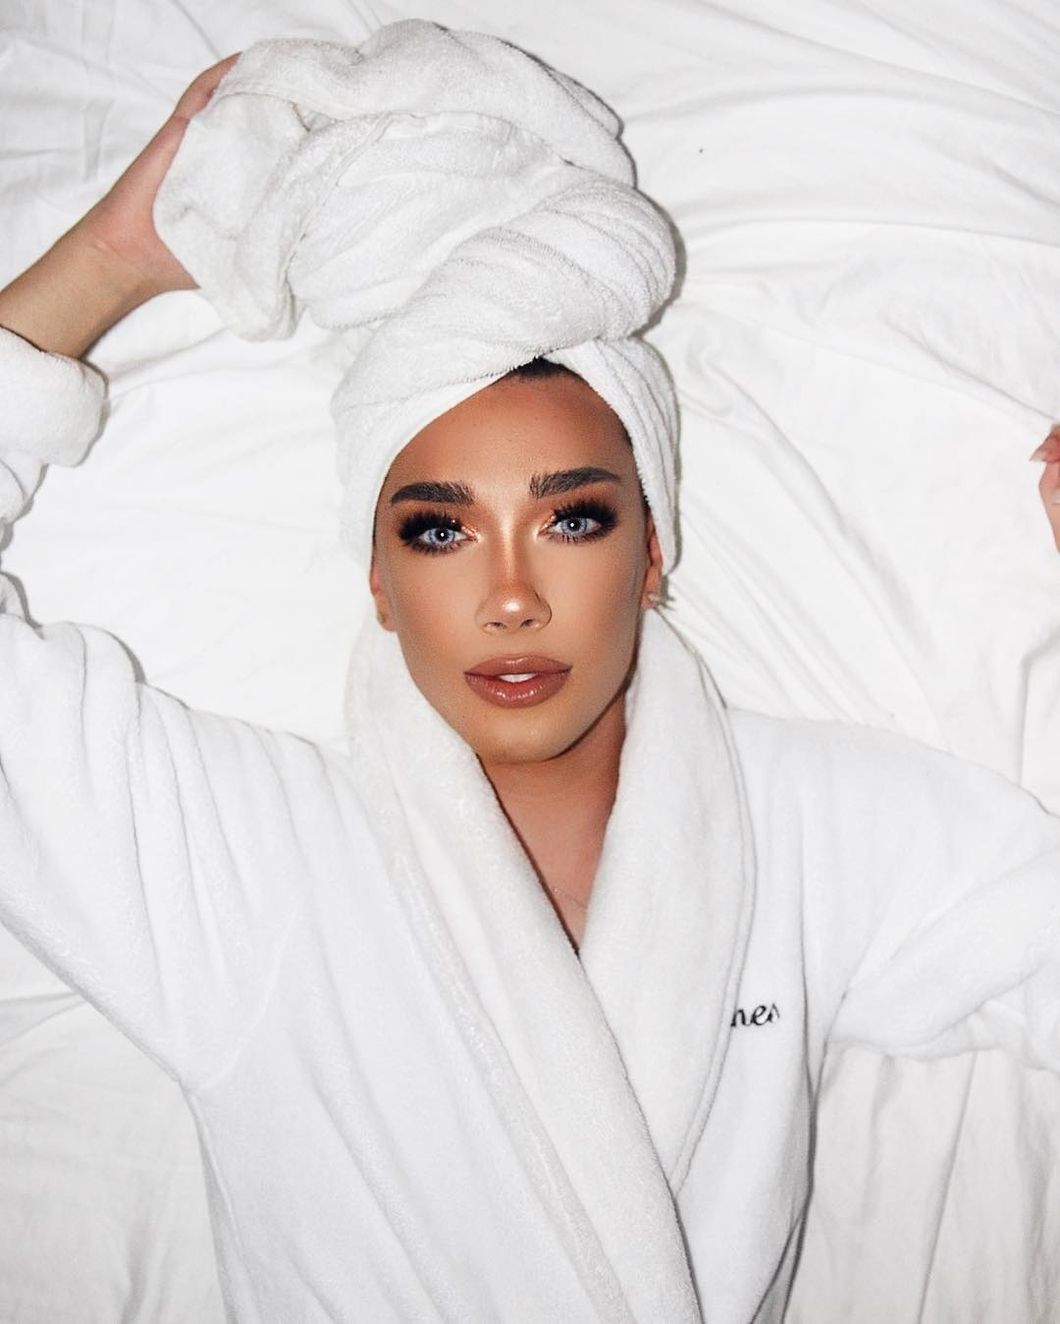 5 Makeup Influencers You Should Make Up Your Mind To Follow, If You Haven't Already